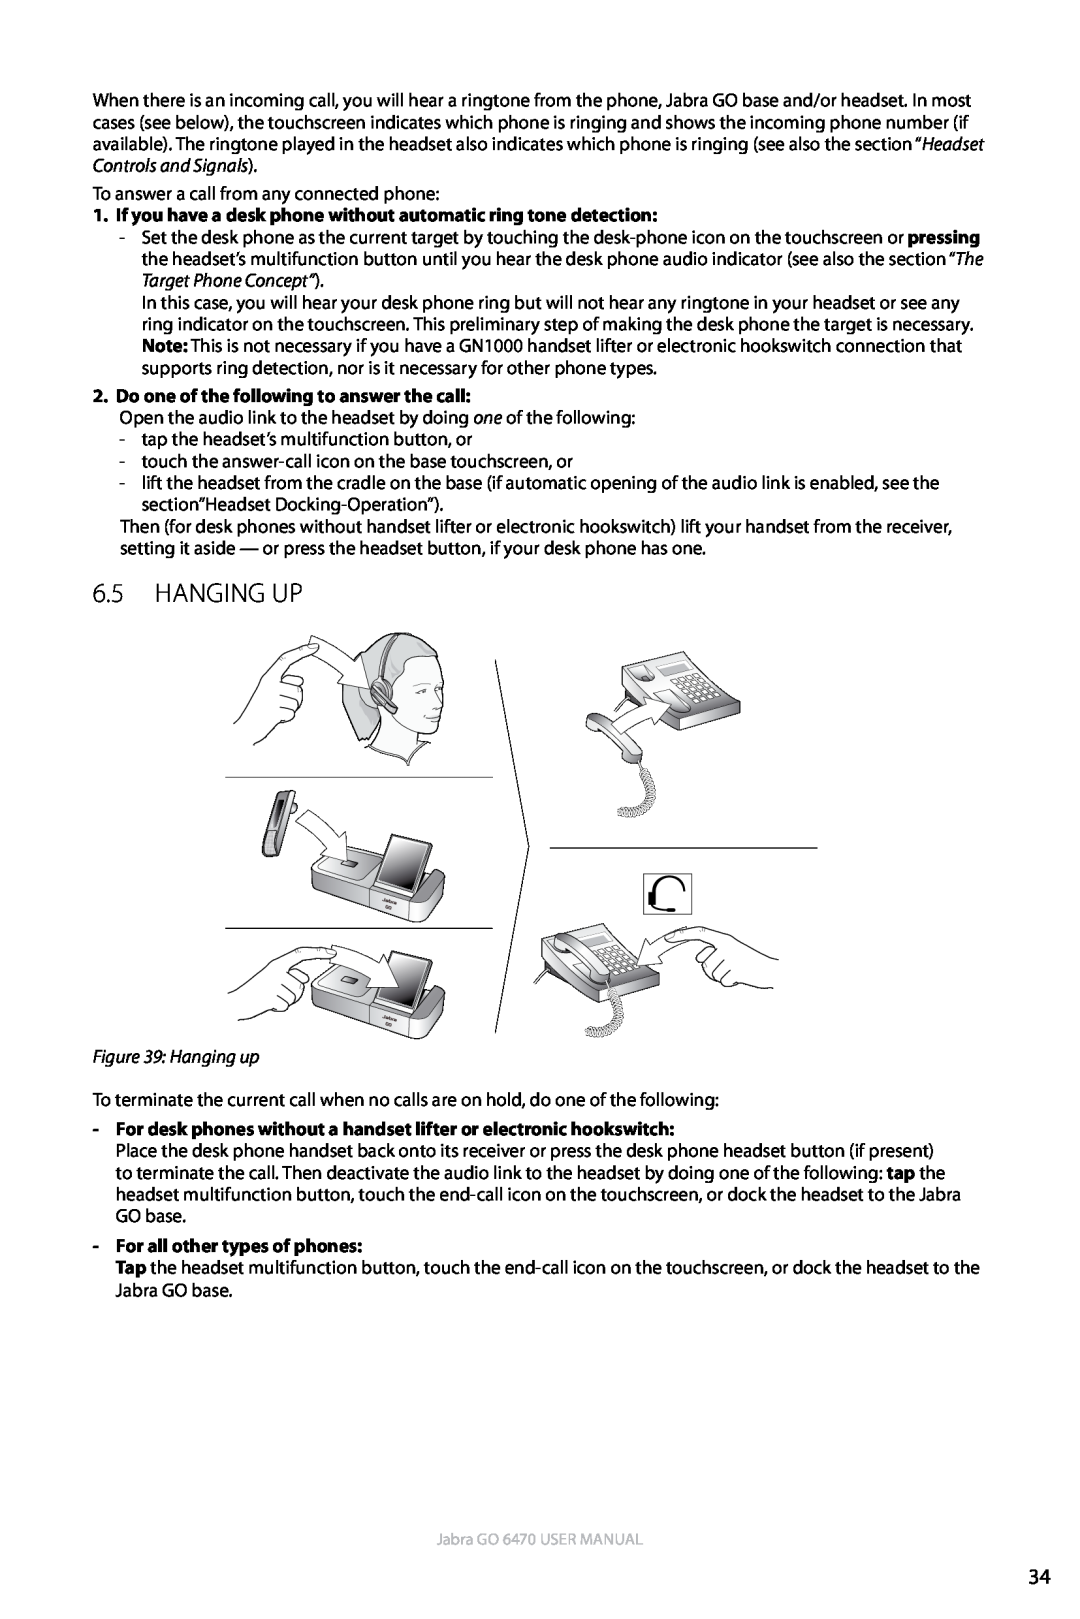 Jabra GO 6470 user manual 6.5Hanging up, Do one of the following to answer the call, For all other types of phones 